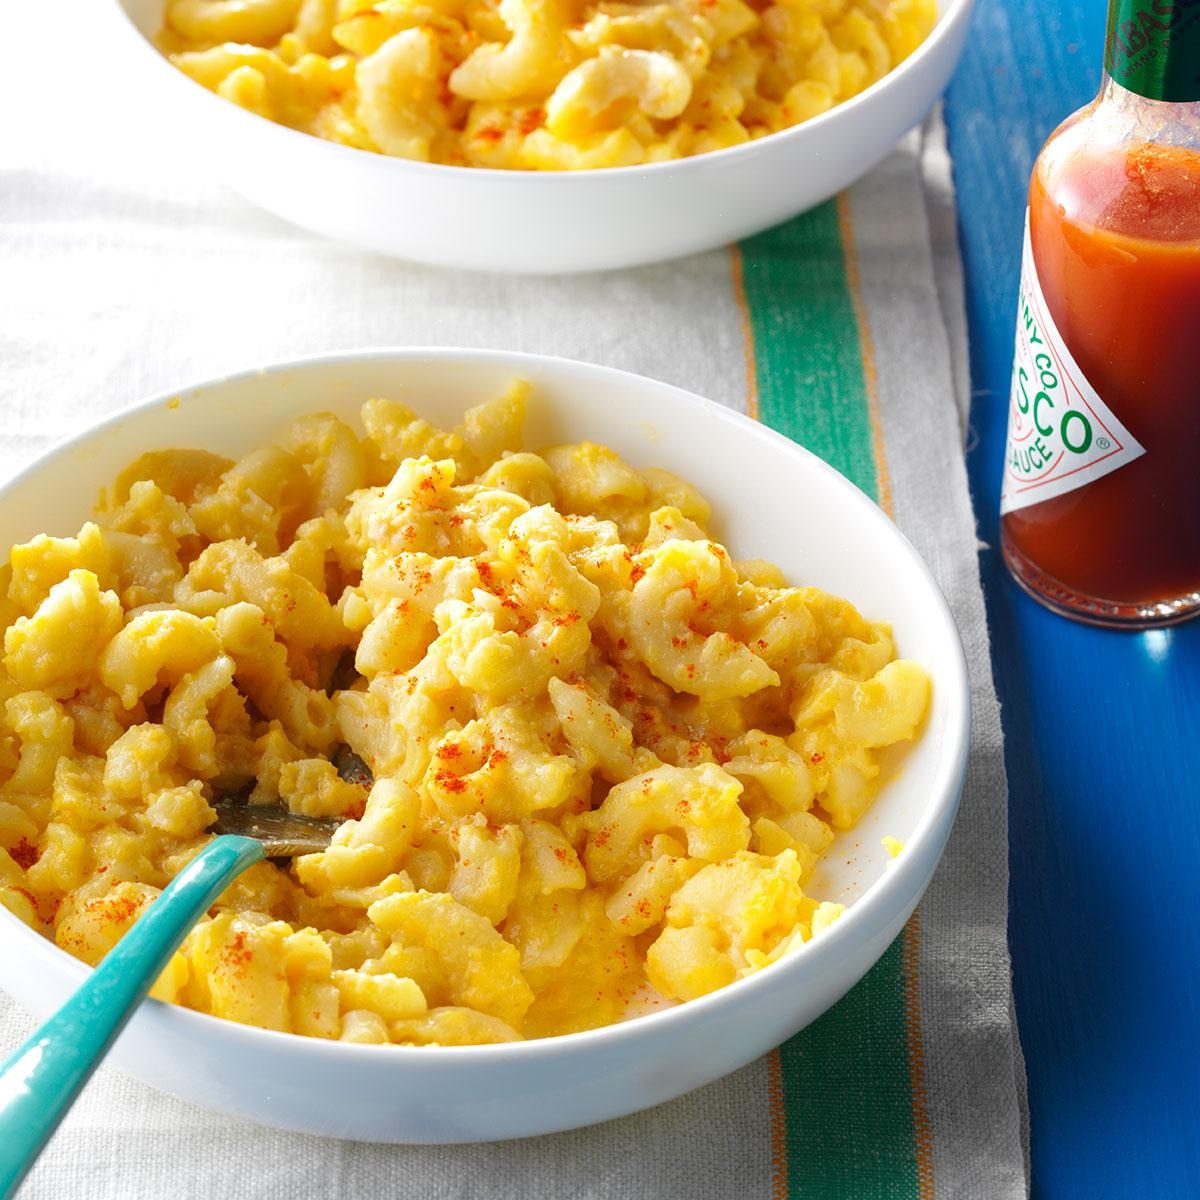 Slow-Cooker Mac and Cheese Recipe: How to Make It